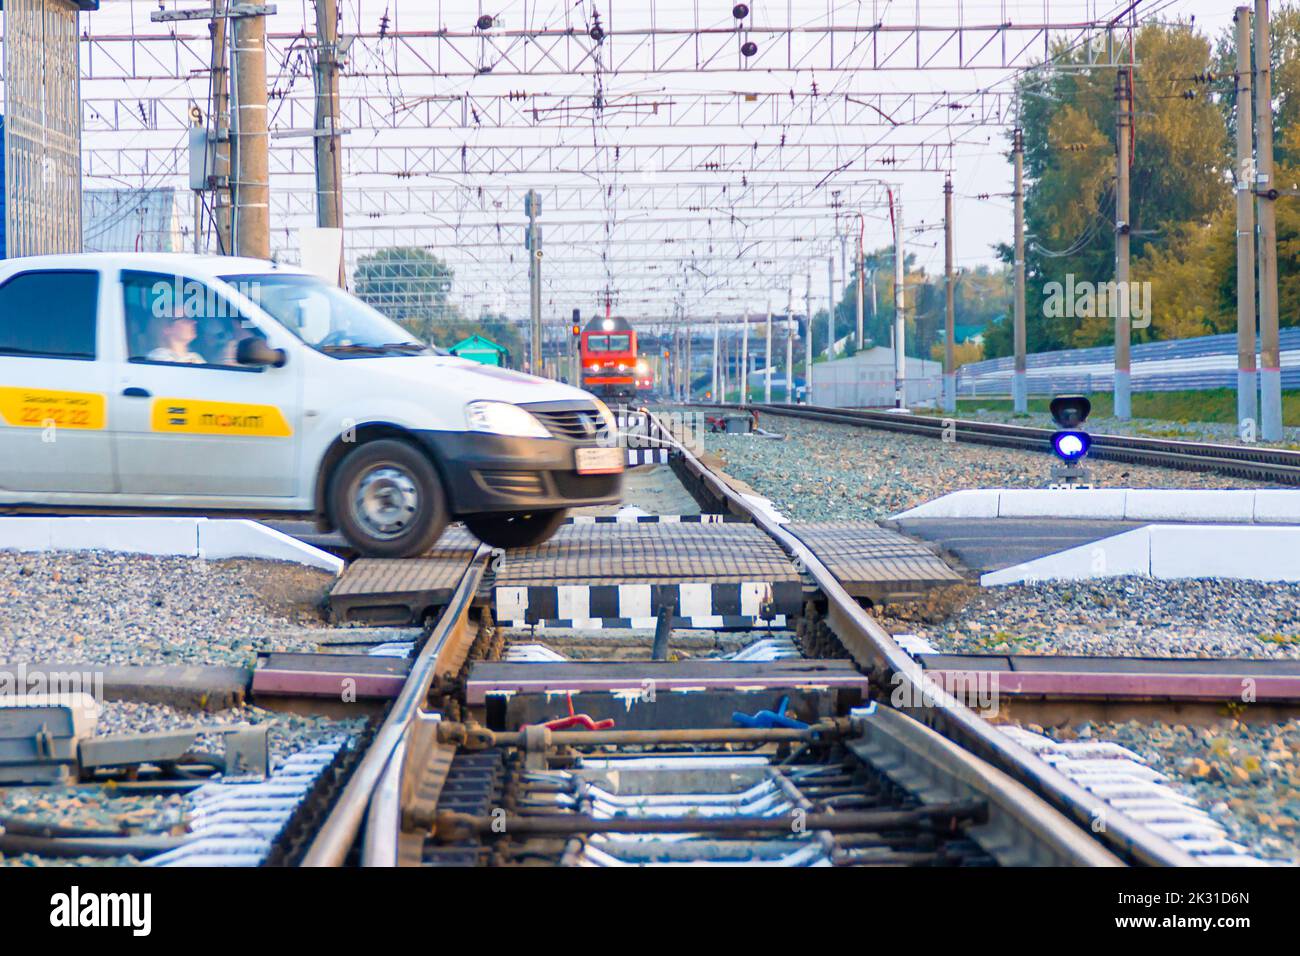 Kemerovo, Russia - September 01, 2022. A hurrying taxi car dangerously crosses a railway crossing in front of an approaching train, selective focus Stock Photo